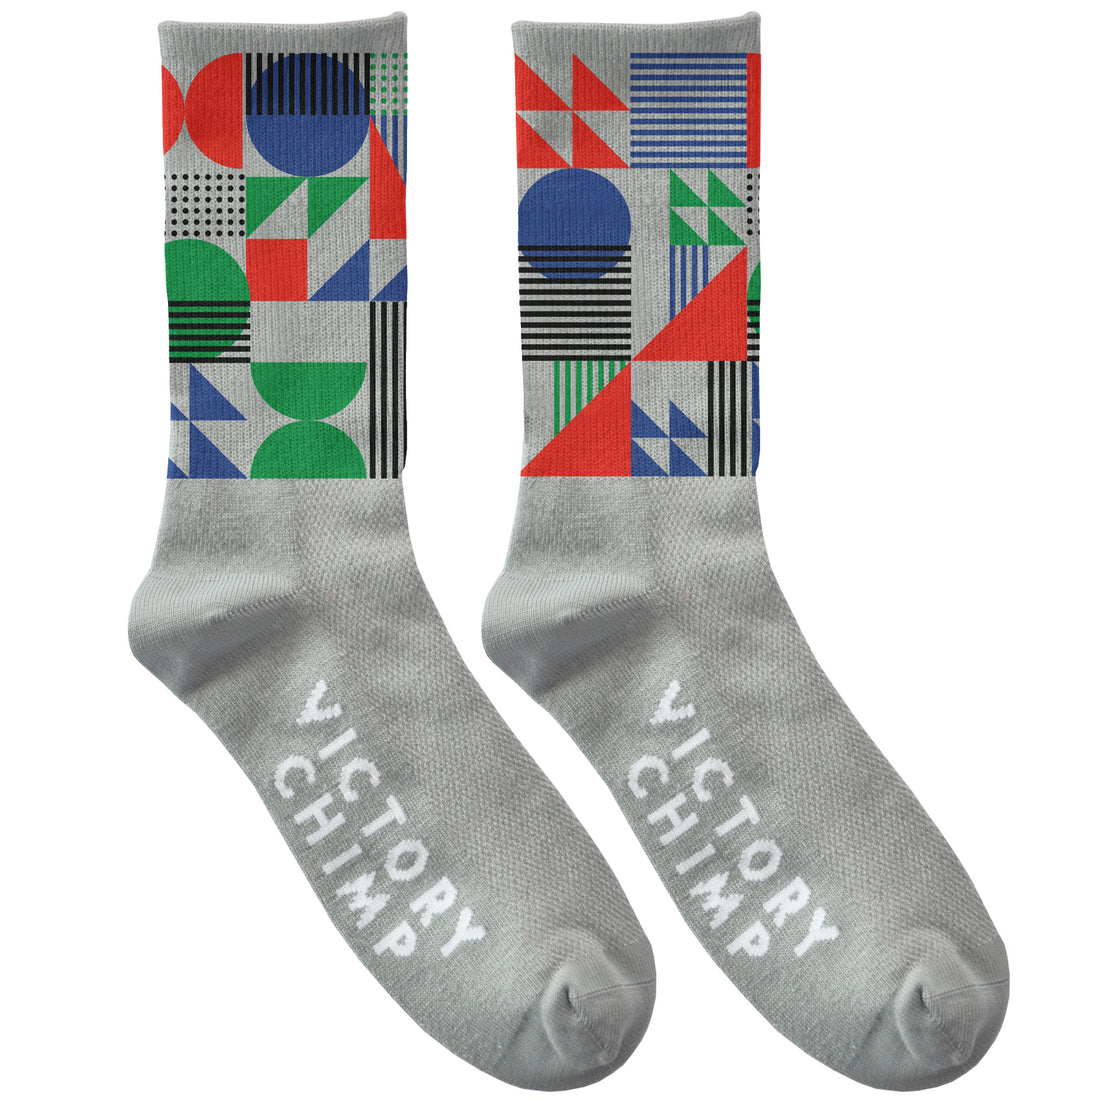 Toshiba 90 High Top Socks (Maillots Moderne 001 Limited Edition)